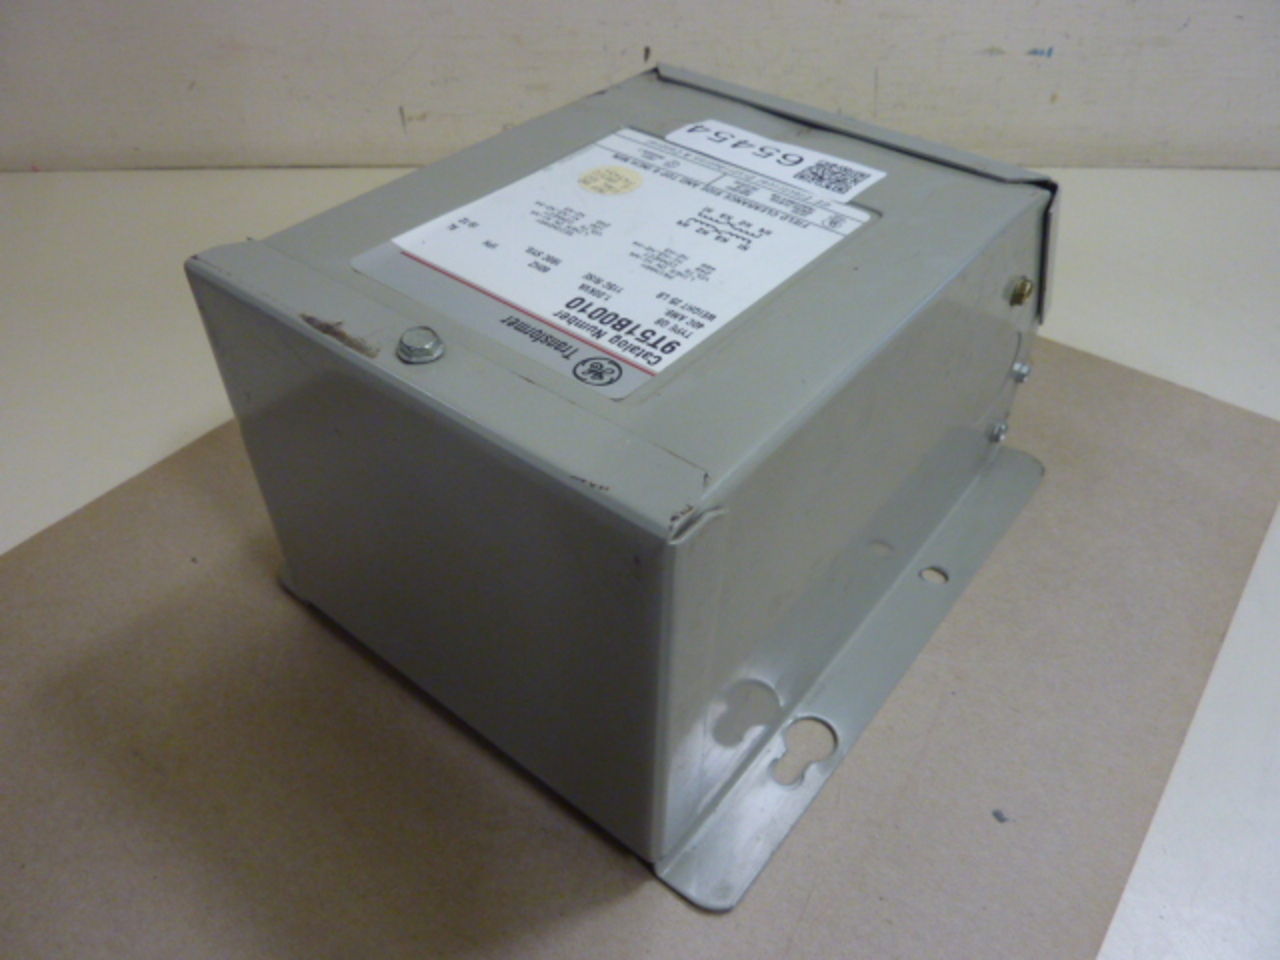 General Electric 1.5 KVA Single Phase Transformer Model 9T51B0011 for sale online 